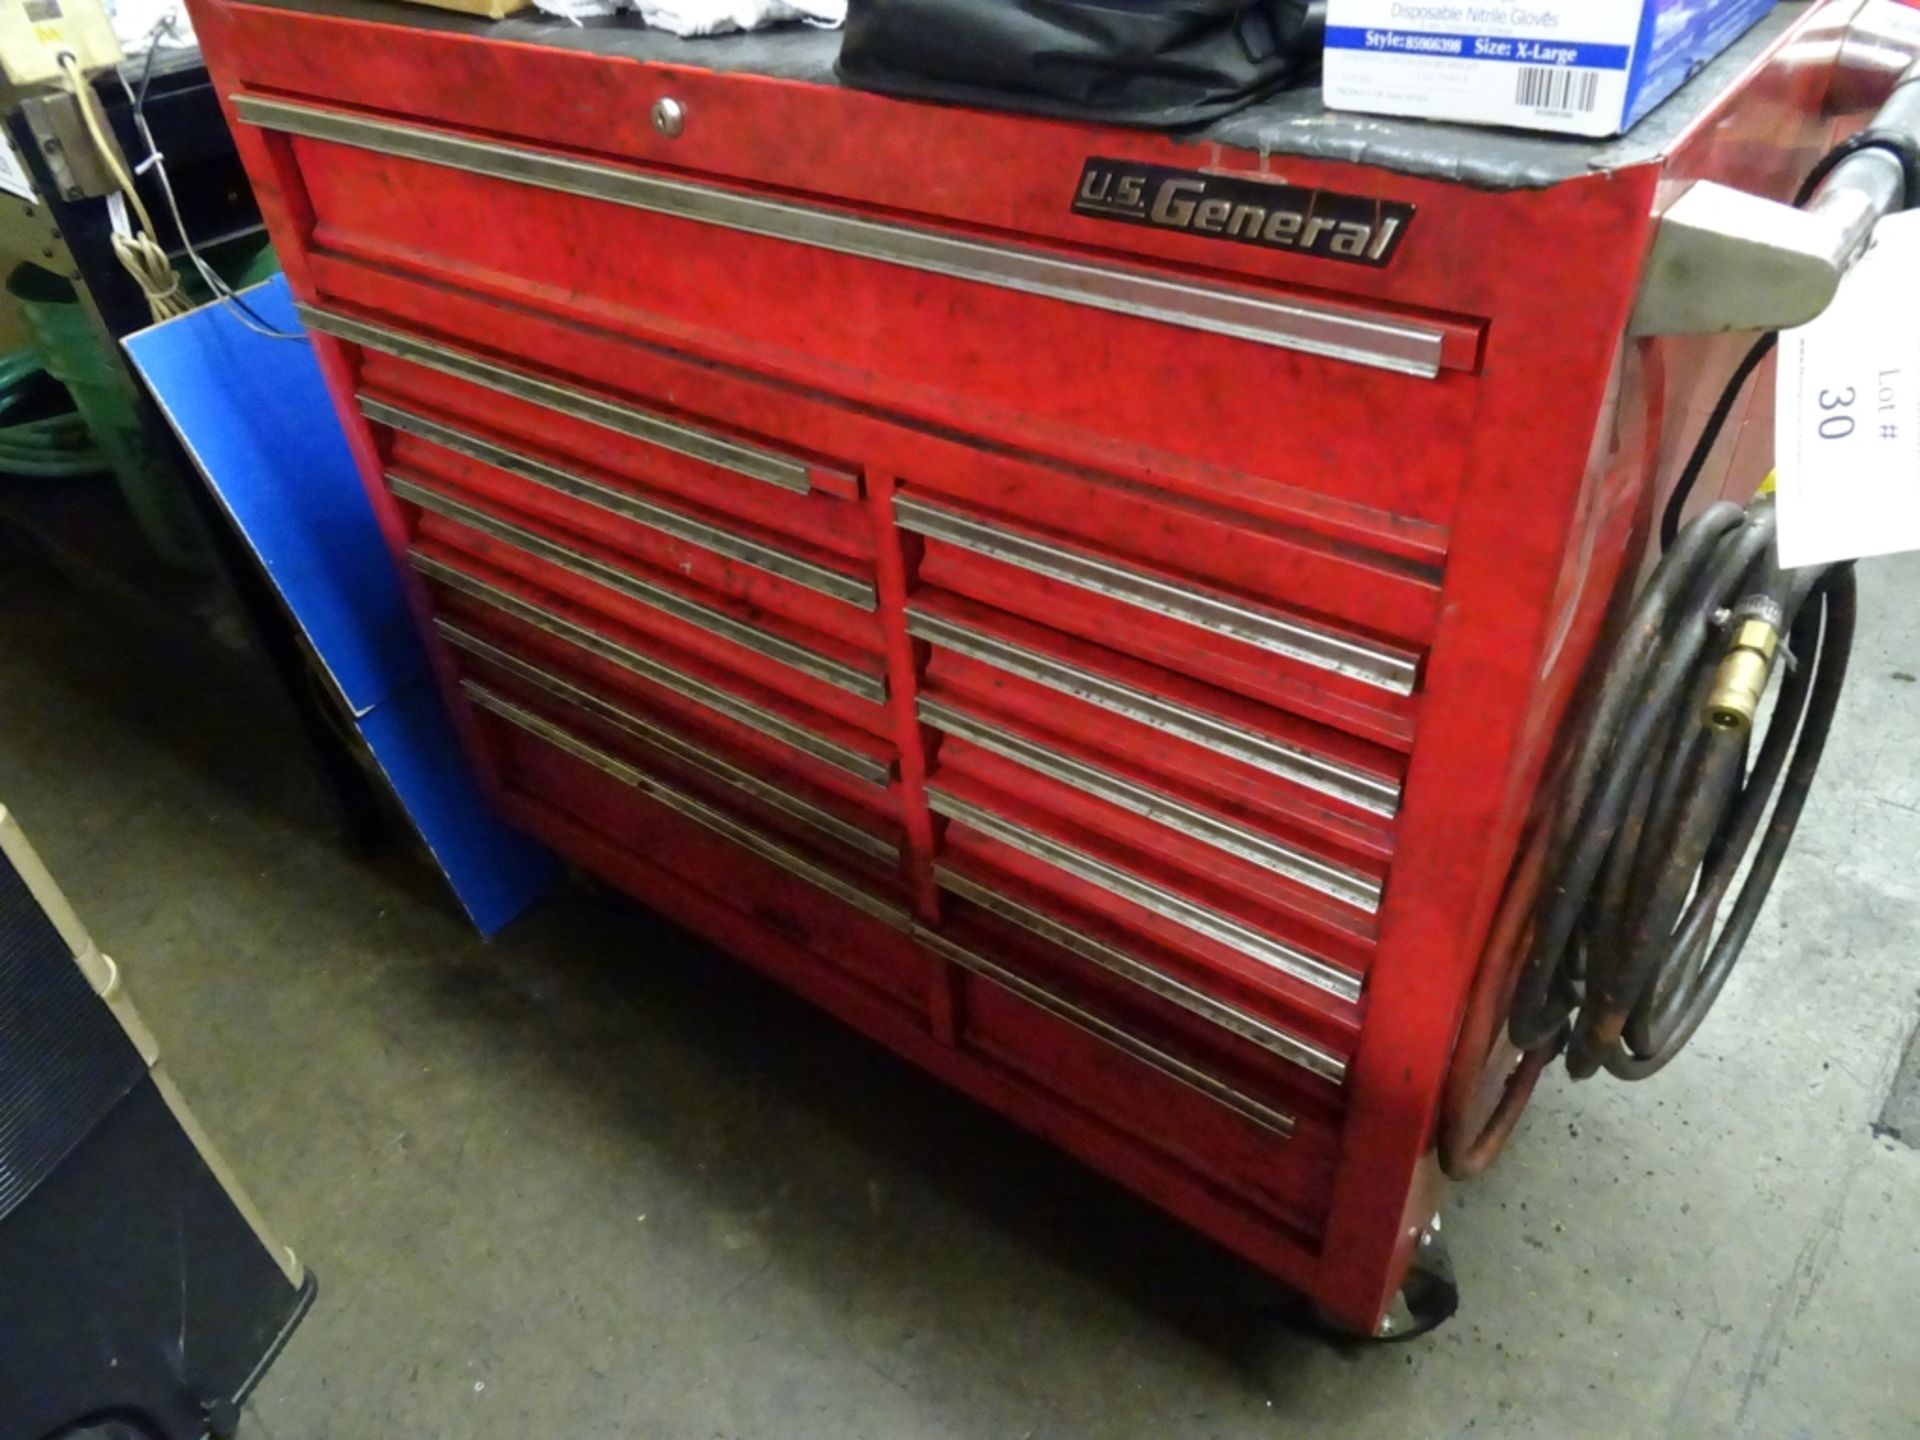 U.S. General 13-Drawer Rolling Tool Box with Associated Tools and Contents